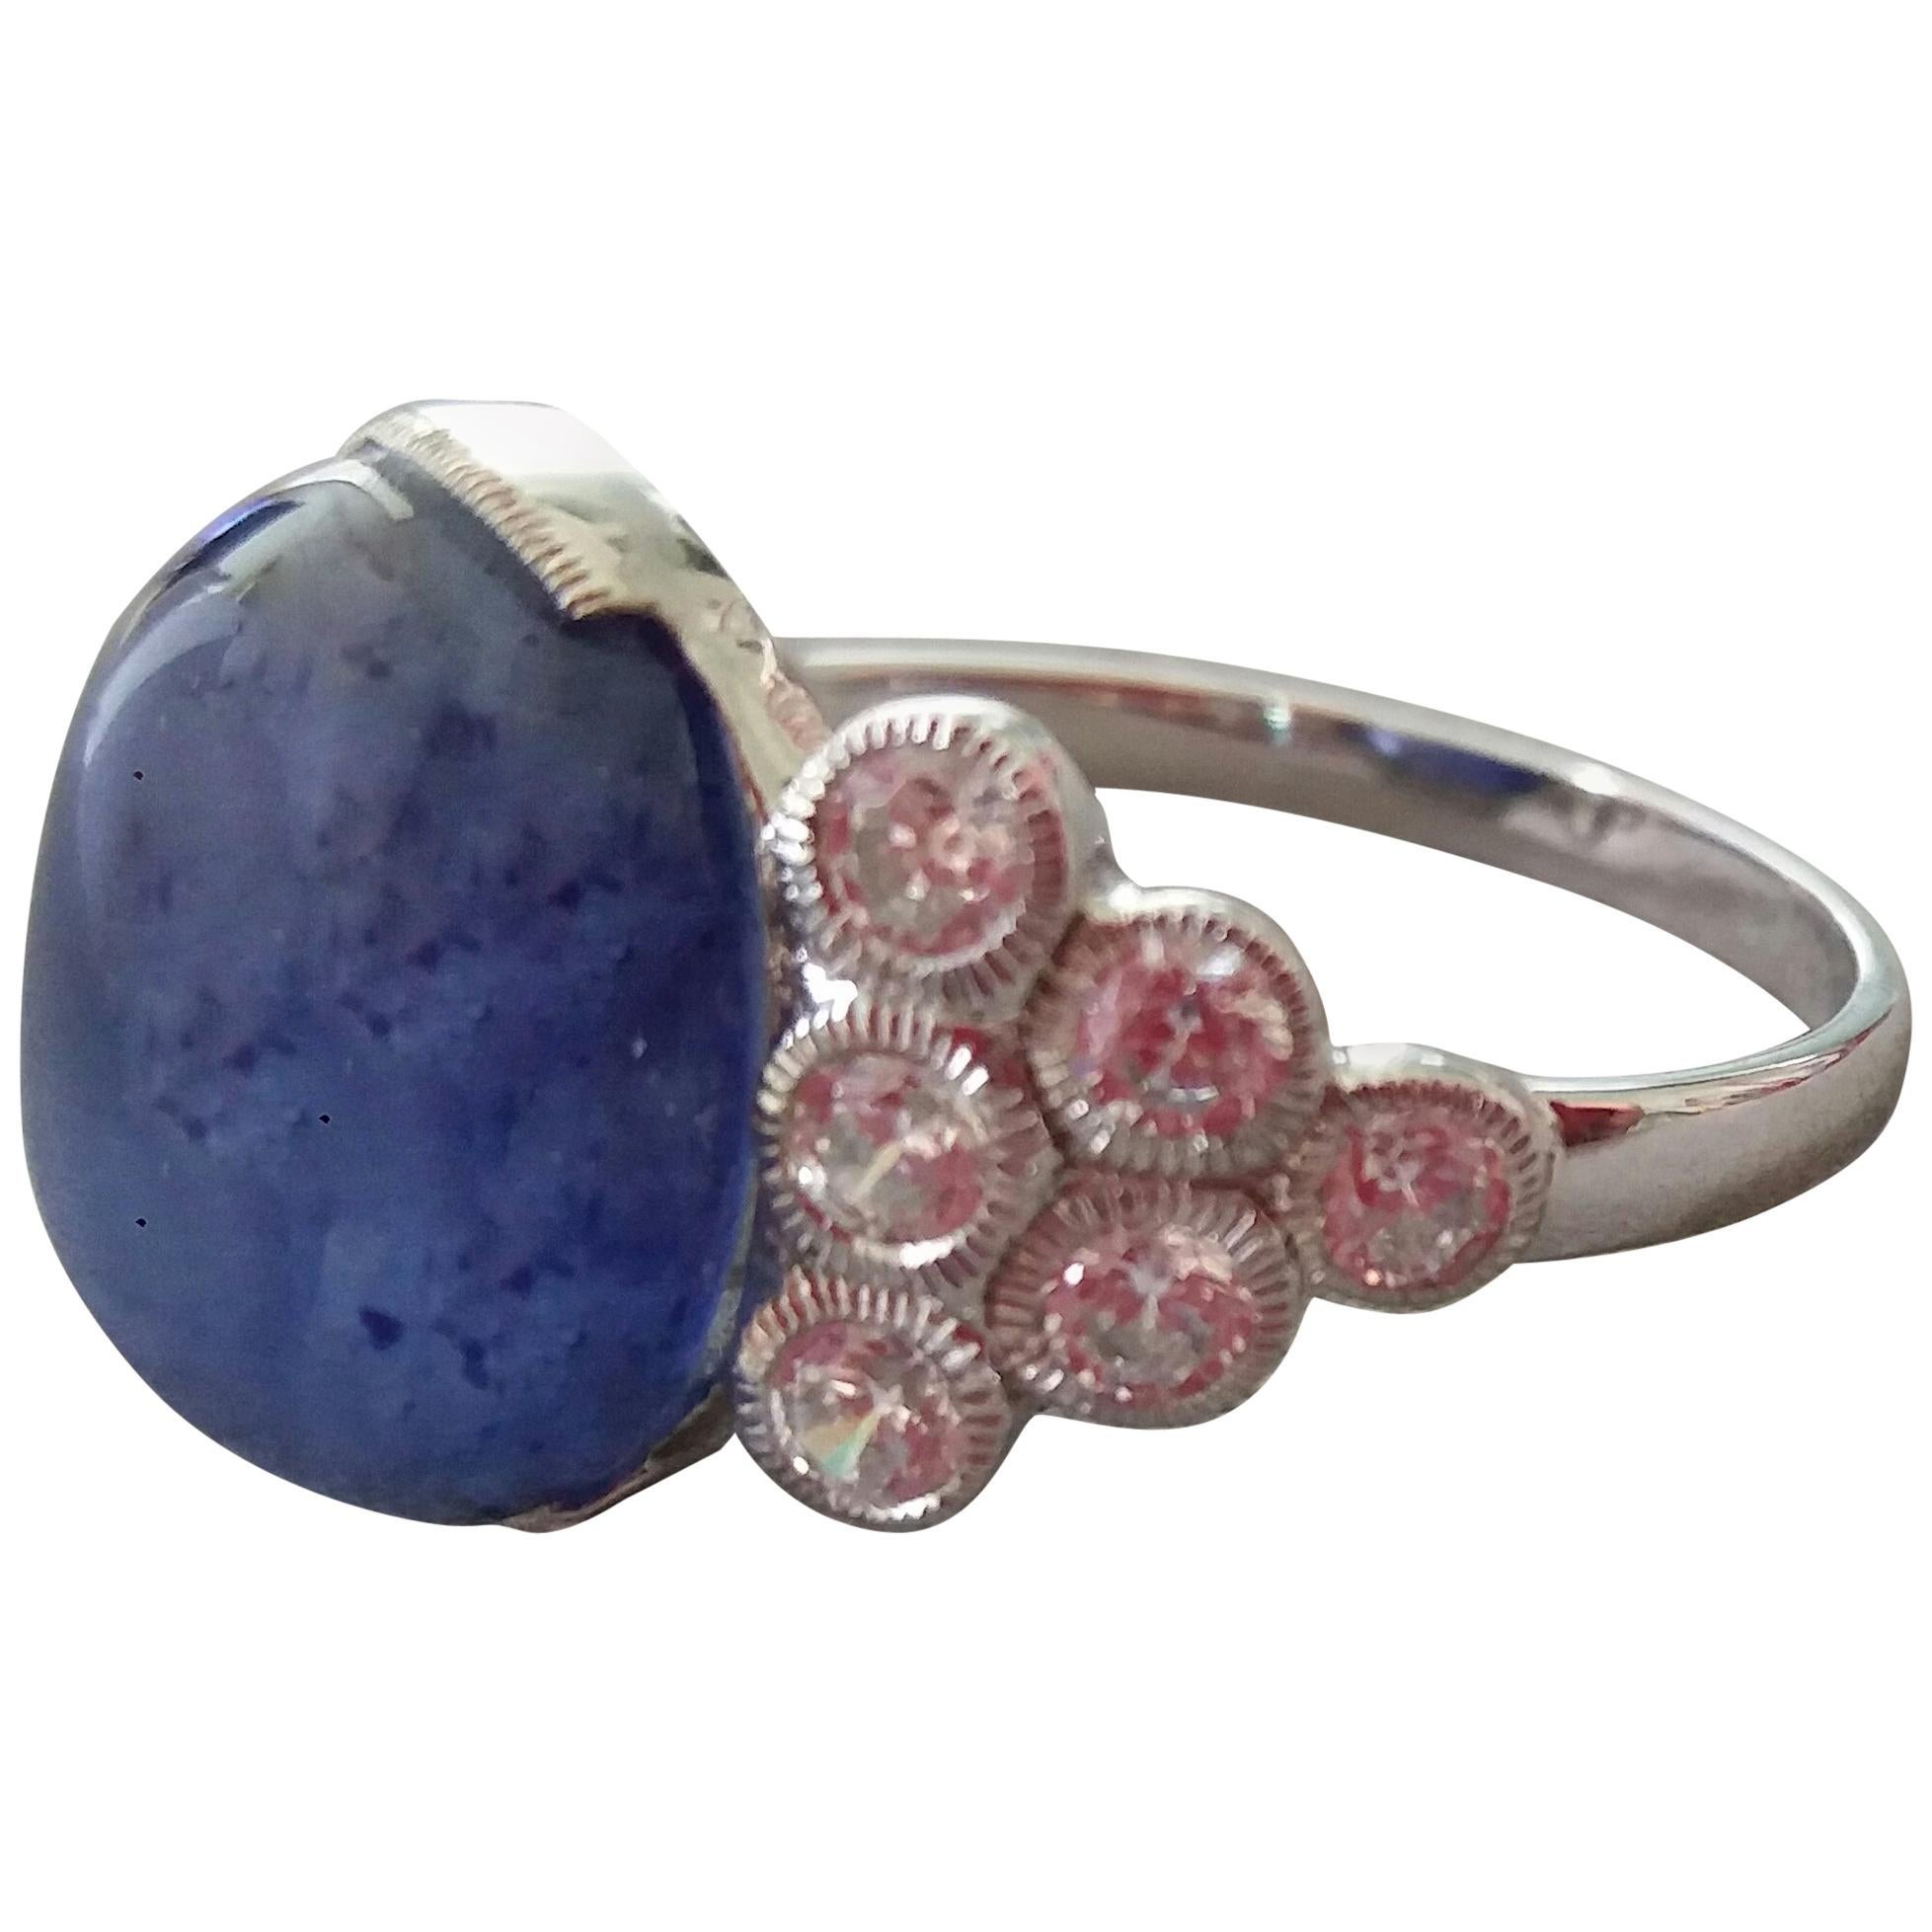 13 Carat Blue Sapphire Oval Cabochon Gold Full Cut Round Diamonds Cocktail Ring